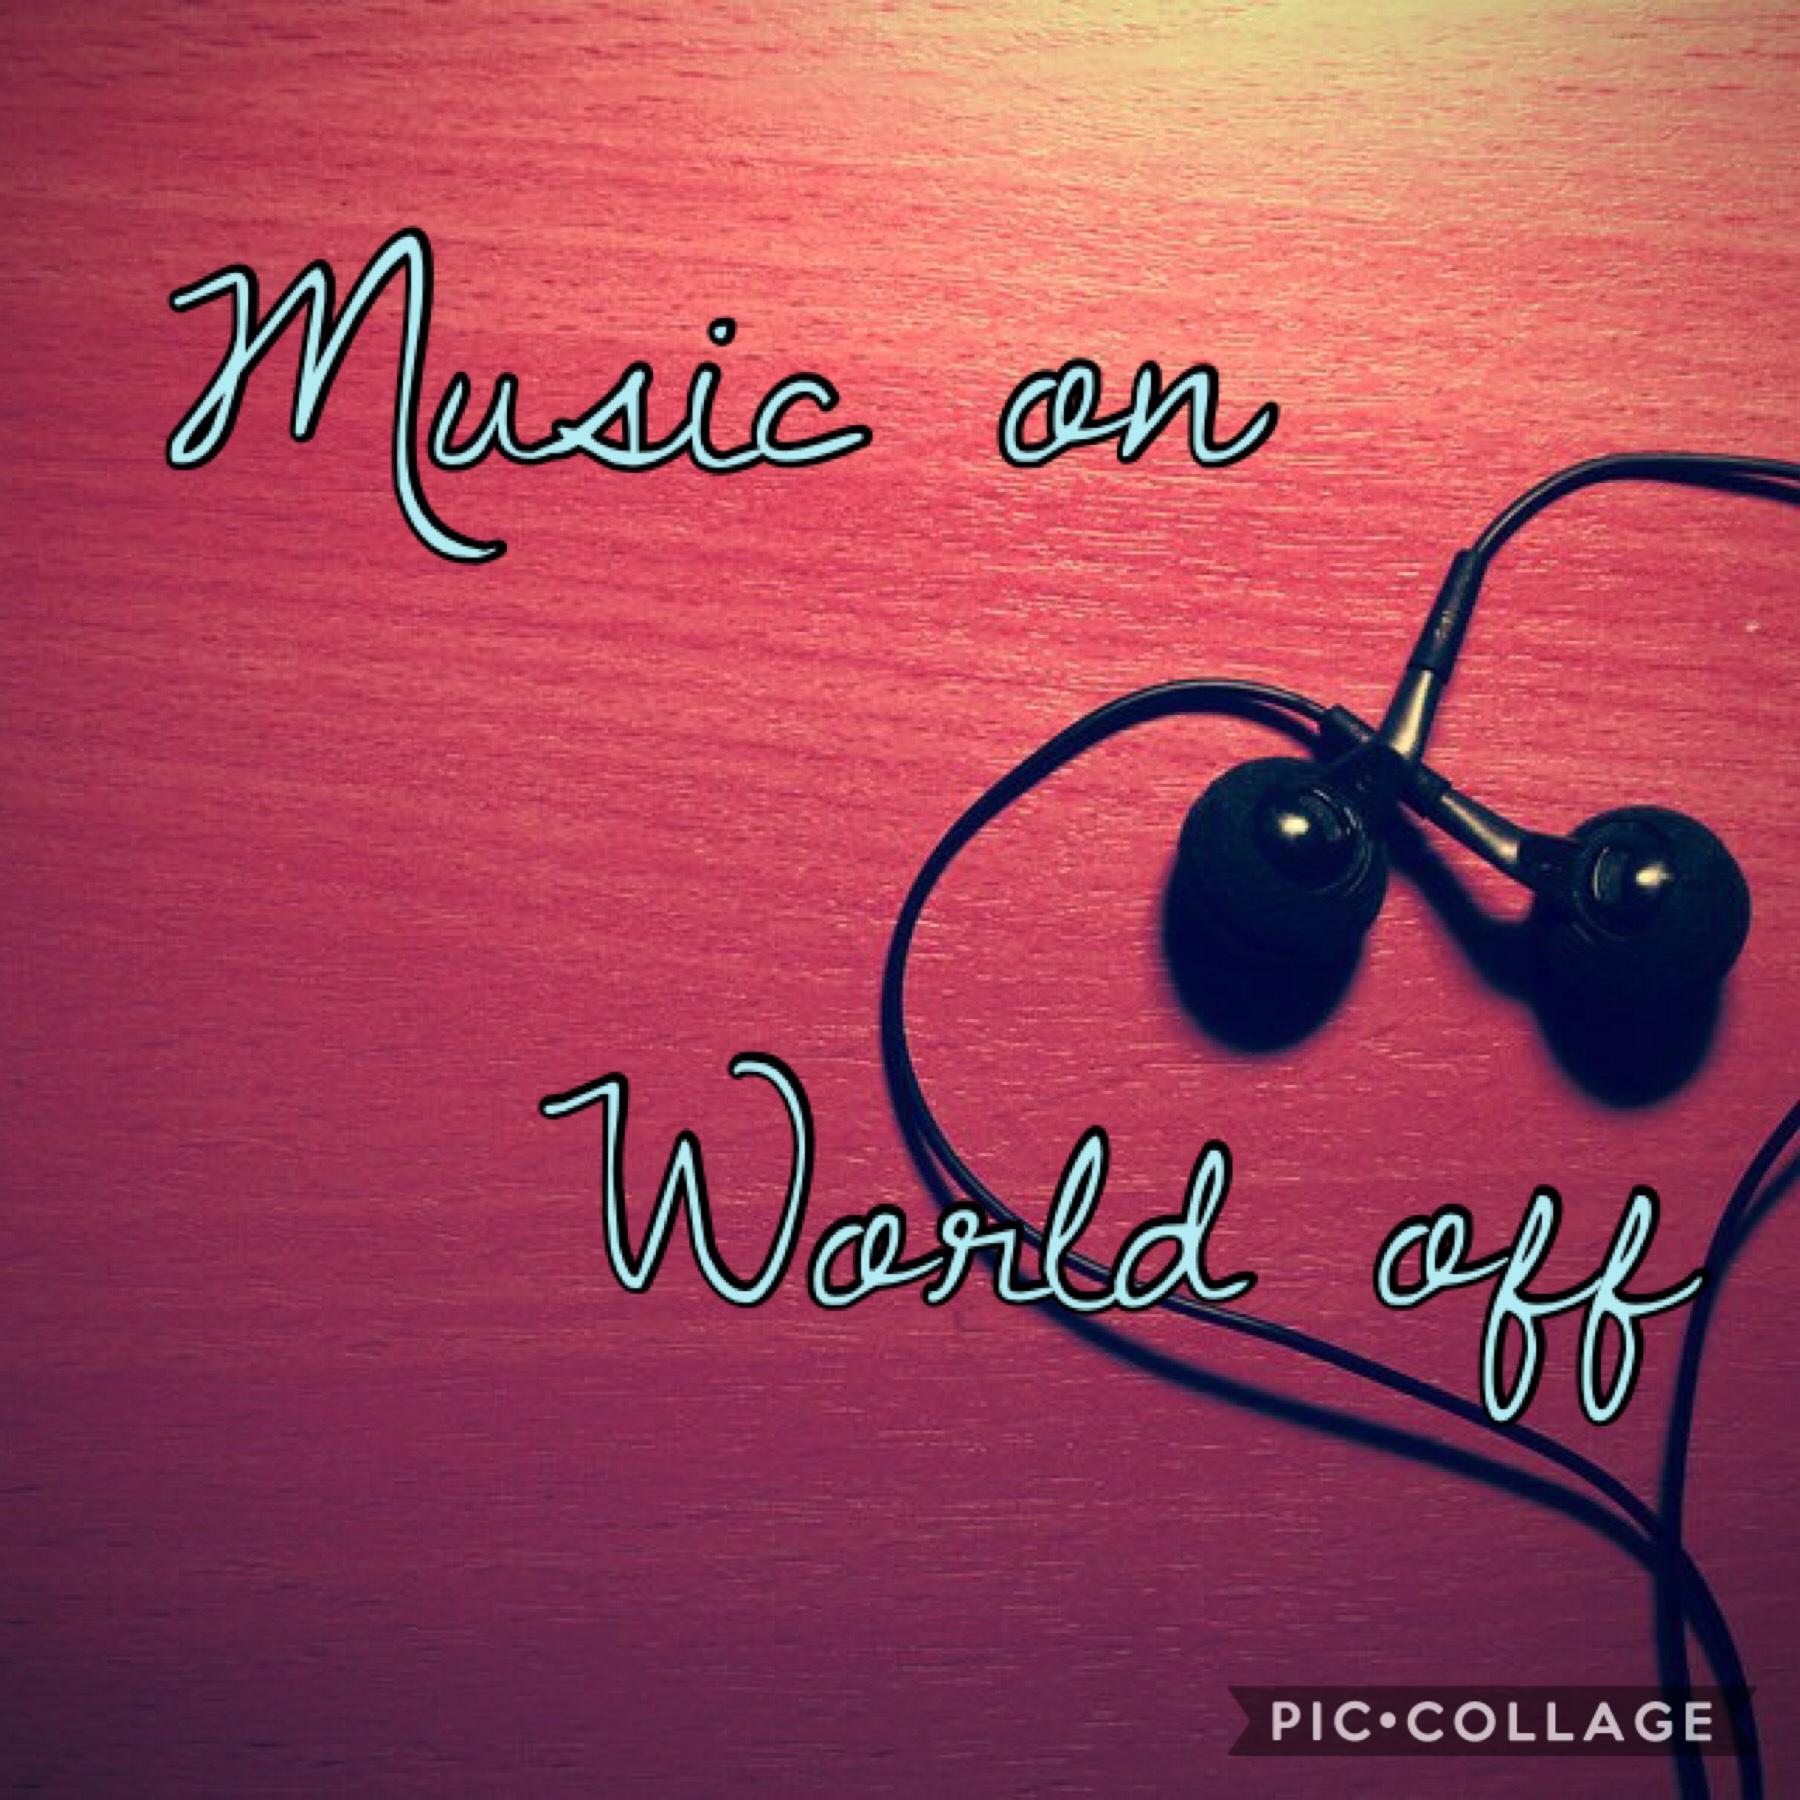 #music 
Comment what your favorite song is 